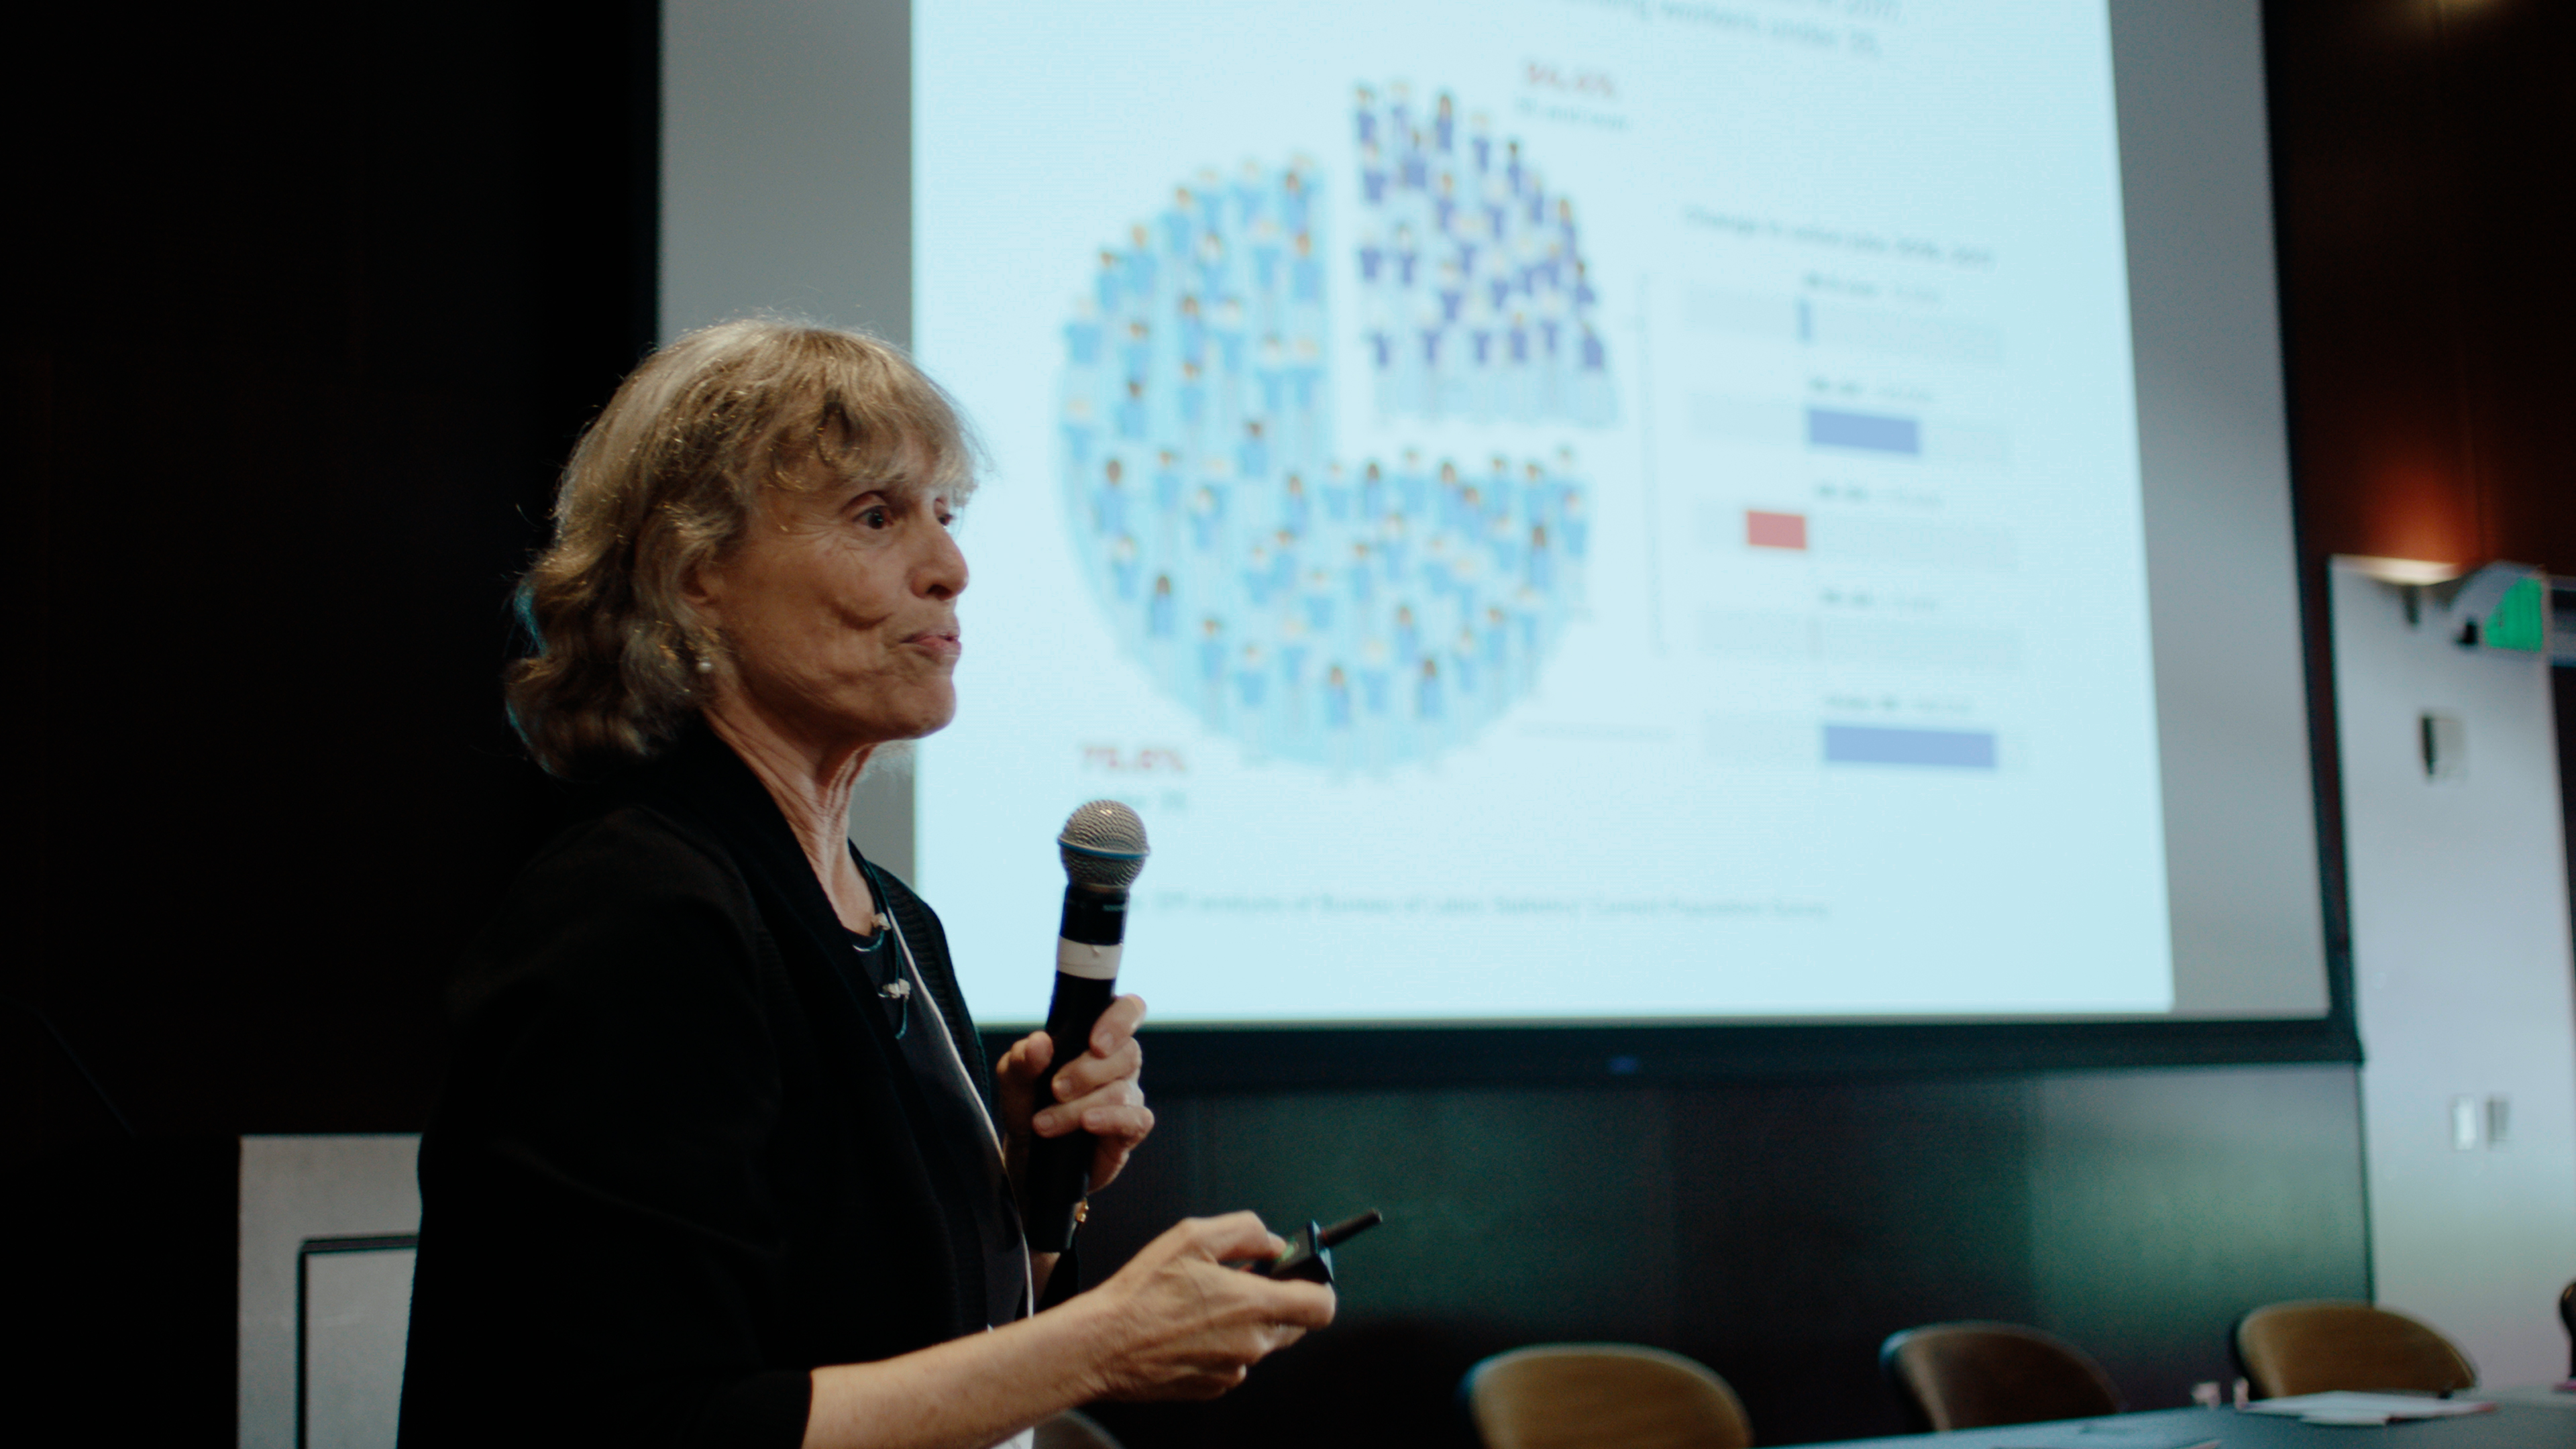 Woman with a microphone in front of a powerpoint slide.